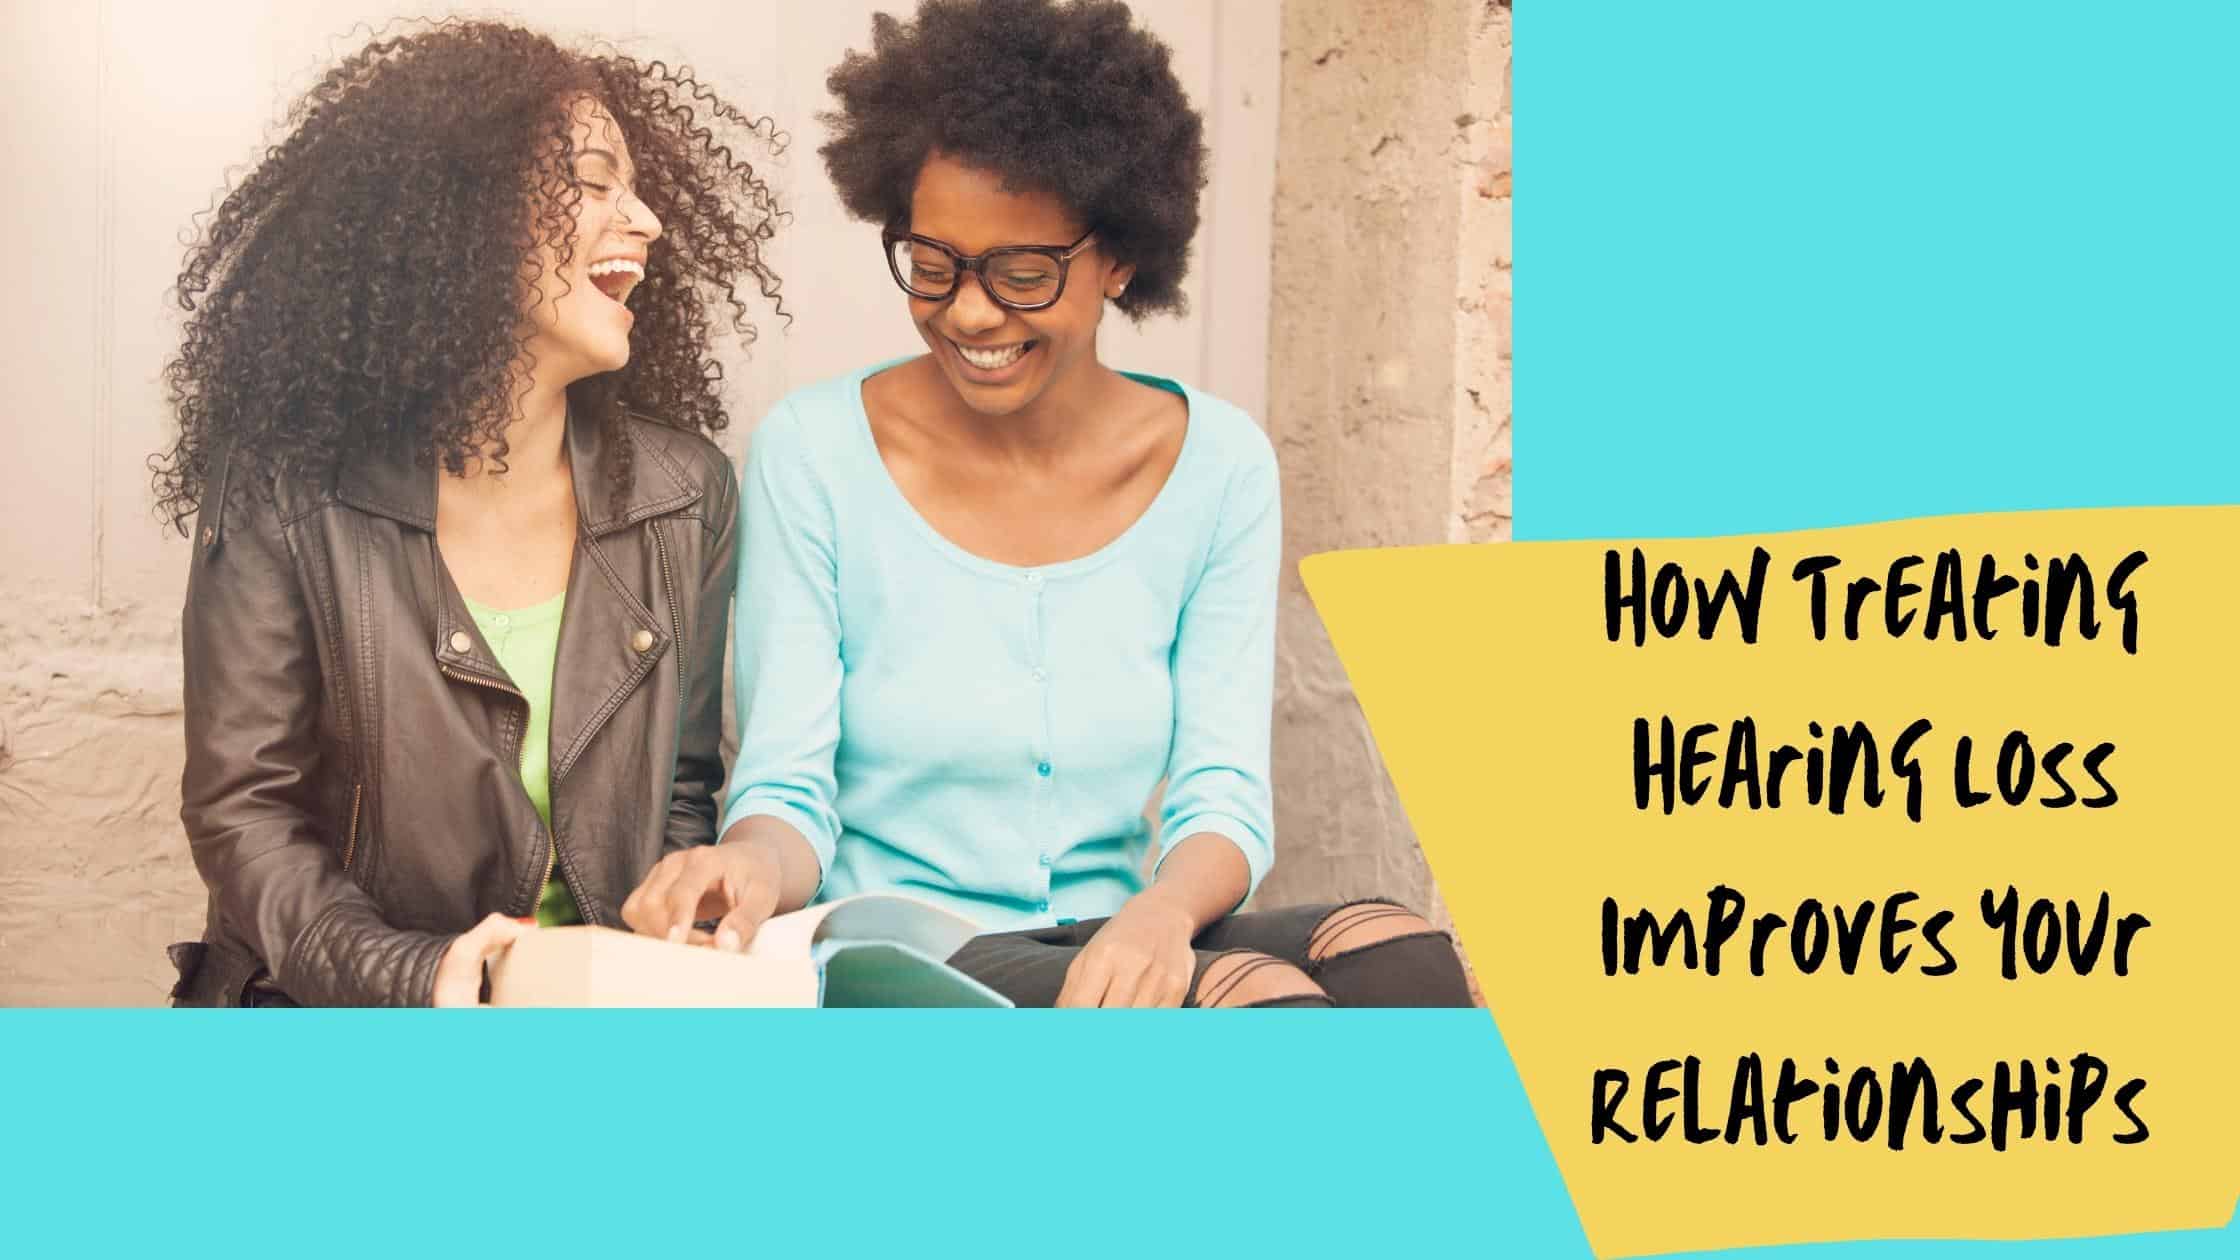 How Treating Hearing Loss improves your relationships